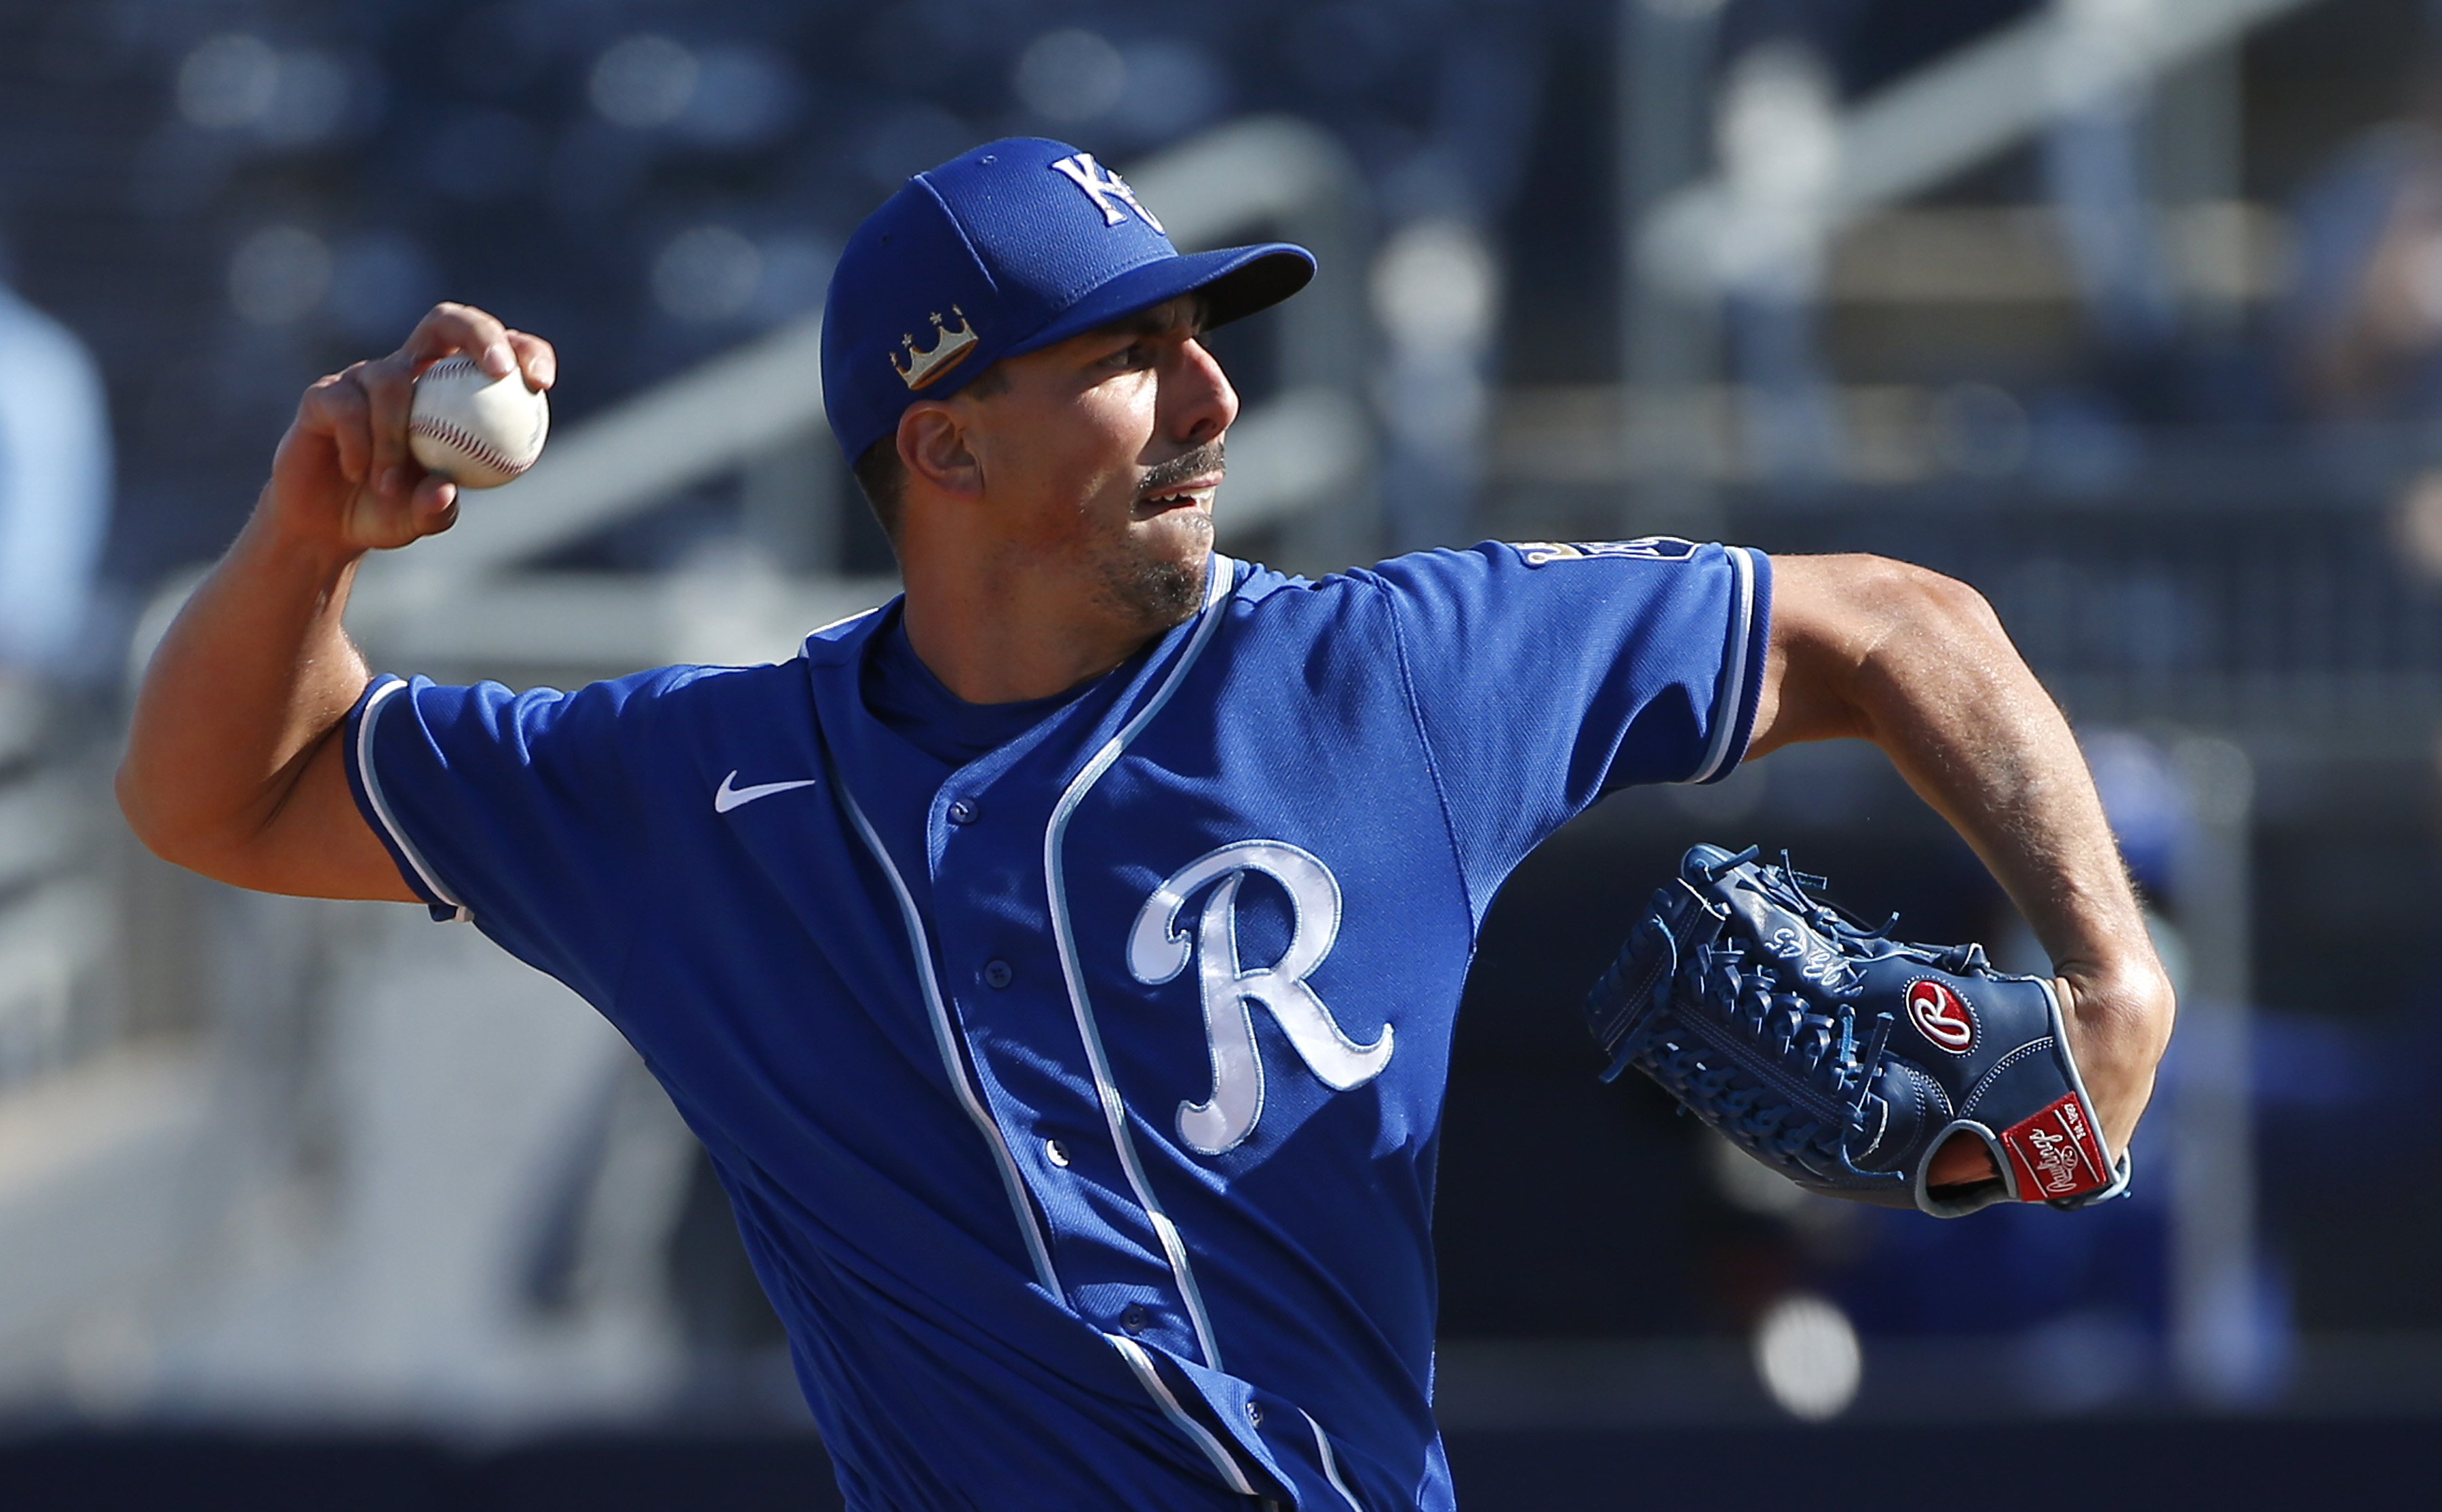 Pitcher Kyle Zimmer #45 of the Kansas City Royals throws against the Seattle Mariners during the eighth inning of the MLB spring training baseball game at Peoria Sports Complex on March 09, 2021 in Peoria, Arizona.